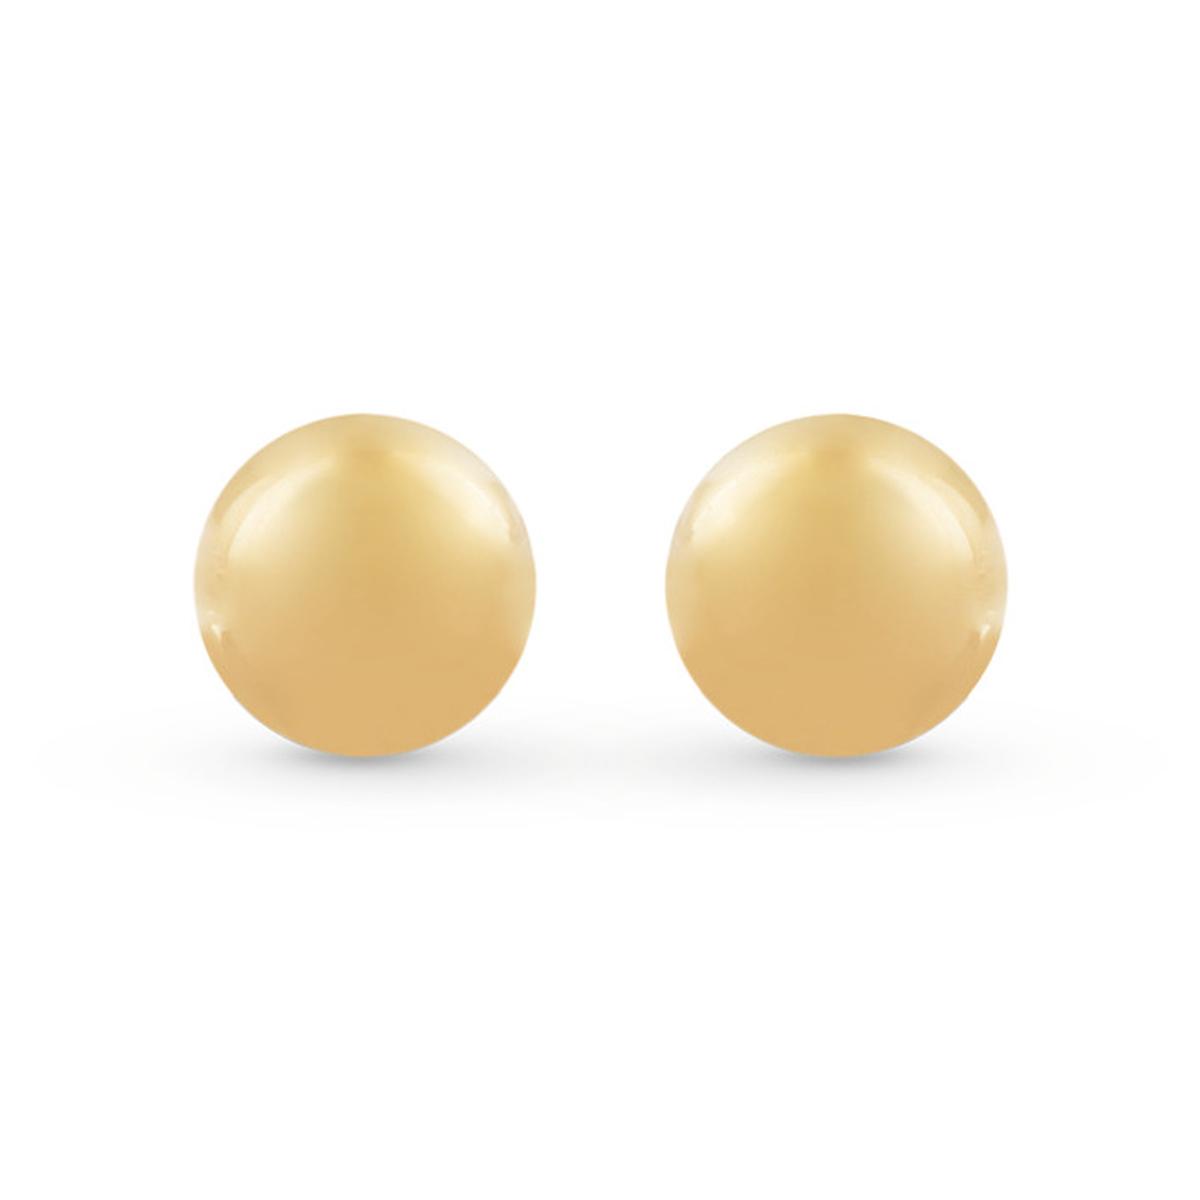 Round earrings in 18kt polished yellow gold - OP0023